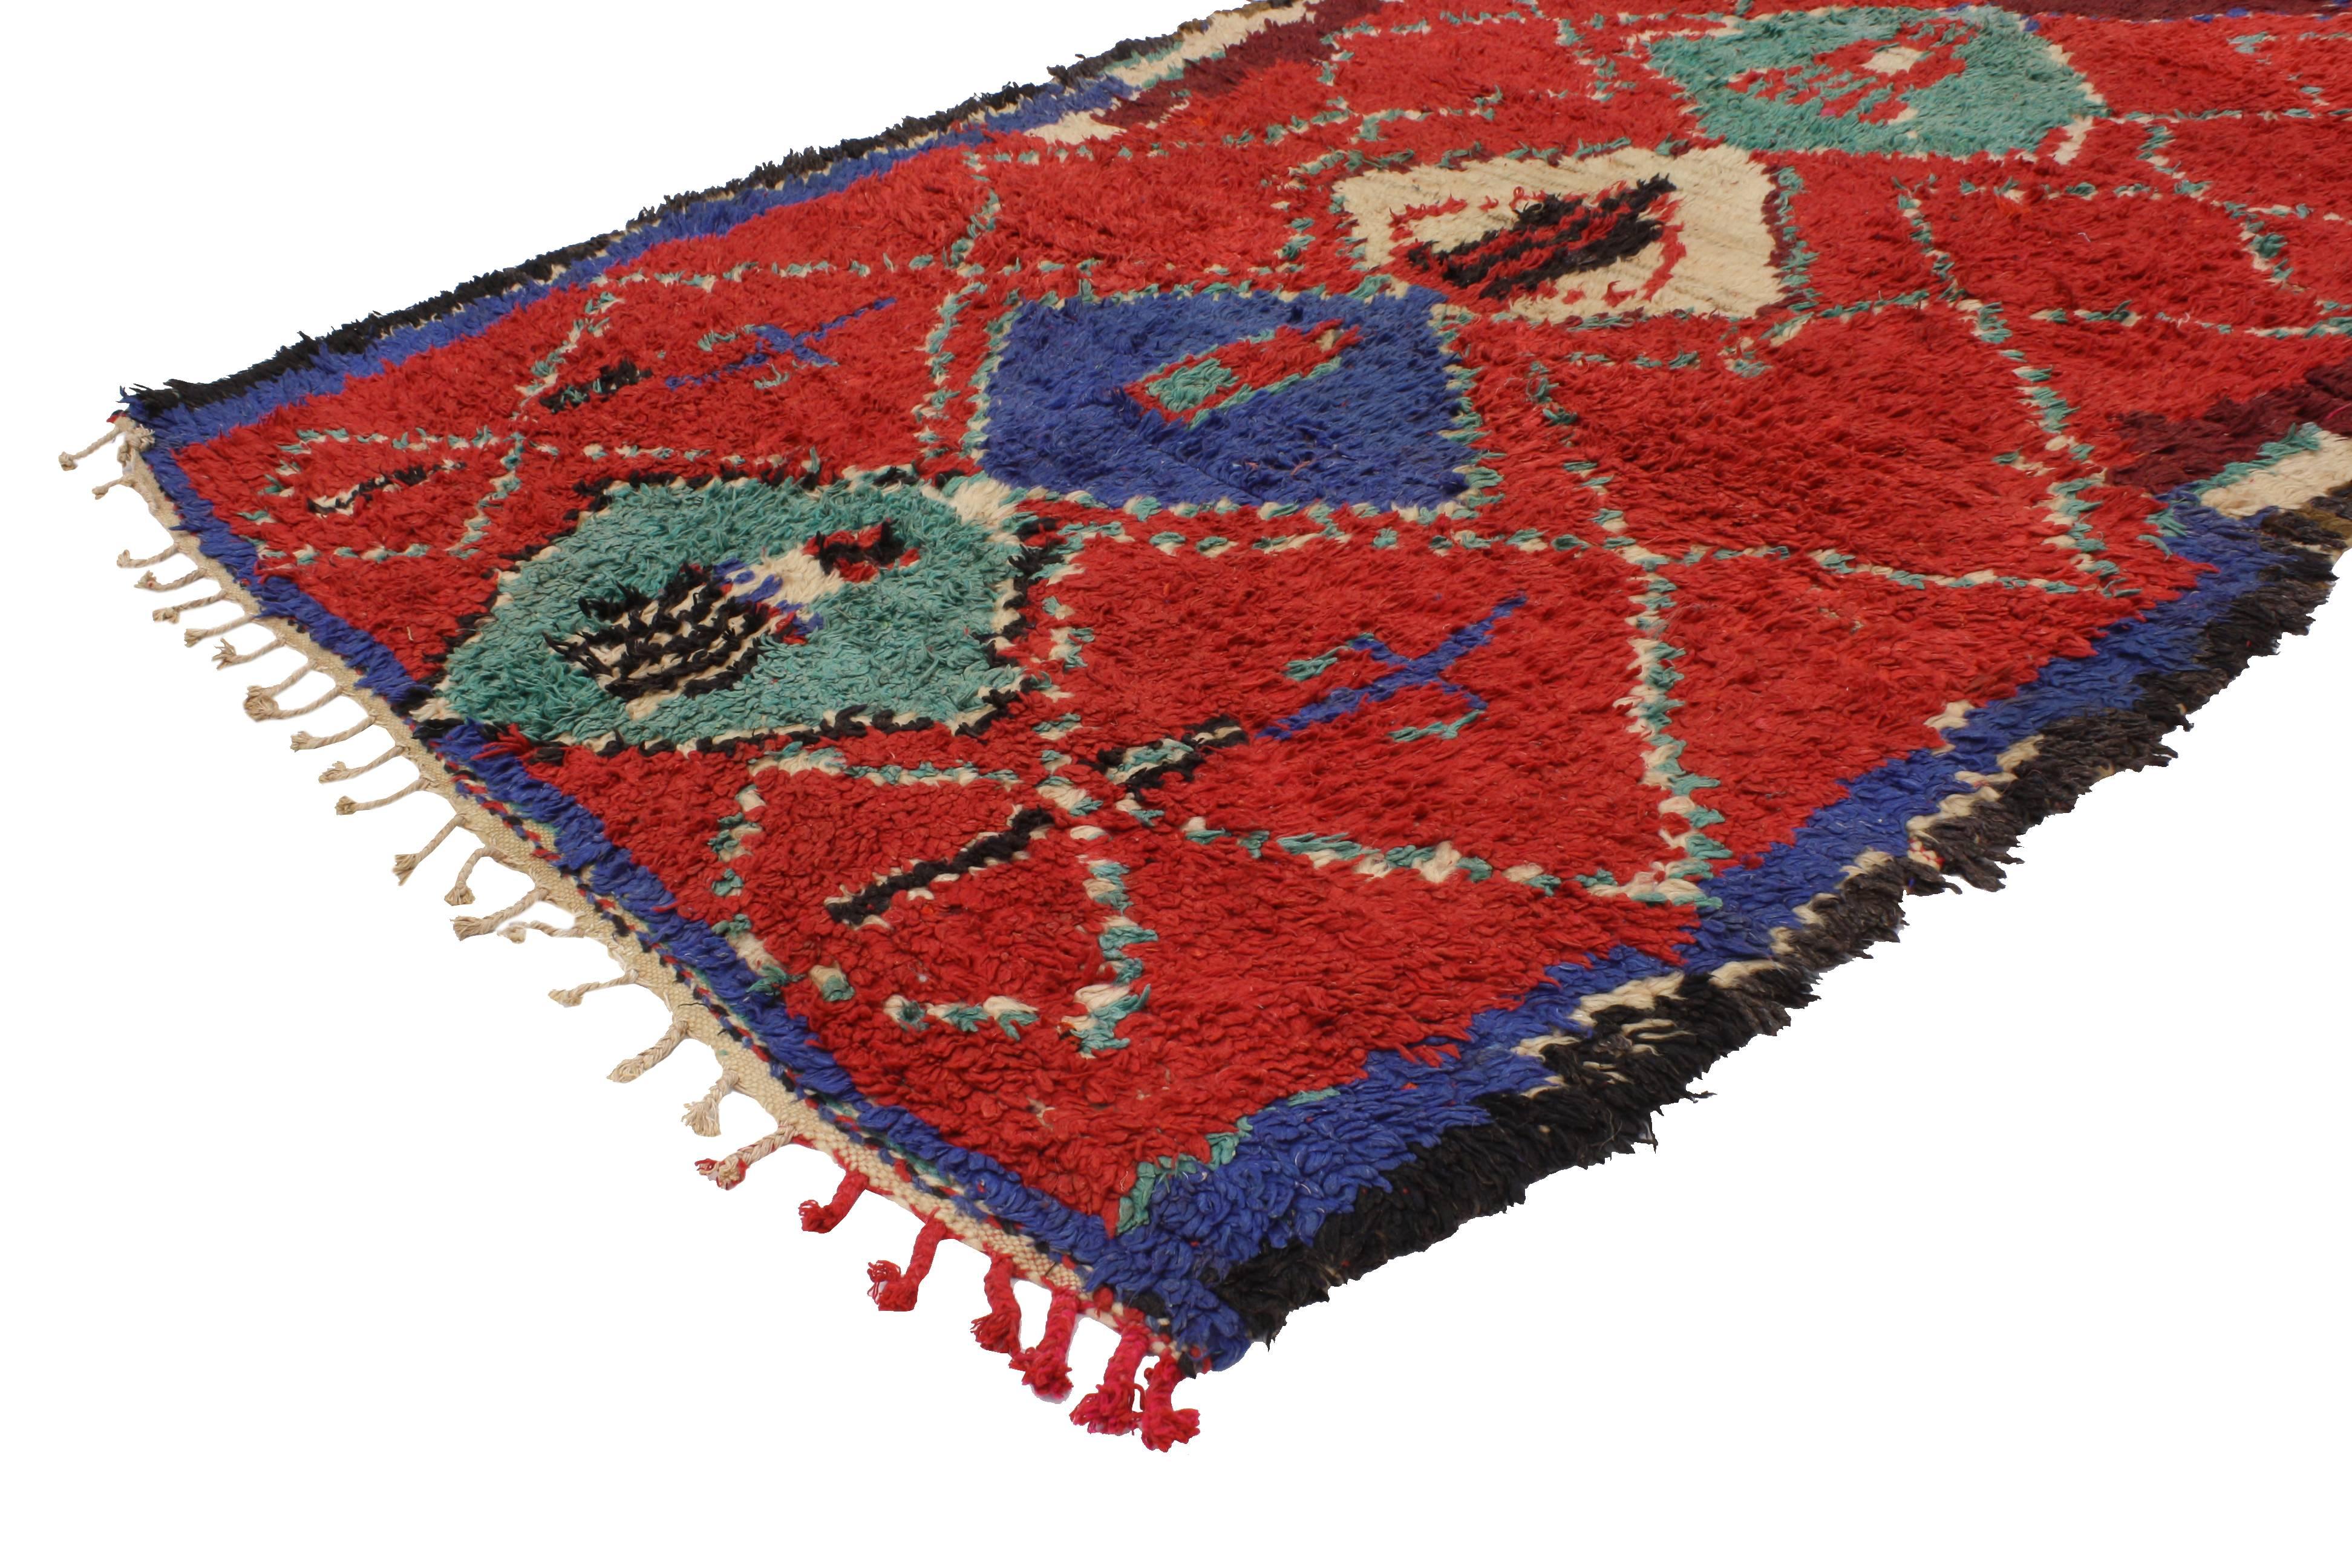 20379 Vintage Berber Moroccan Rug with Tribal Style, Shag Hallway Runner 04'02 x 08'08. A fiery shade of red provides a beautiful backdrop for the varied color diamonds that overlay this hand-knotted wool vintage Berber Moroccan rug runner. It